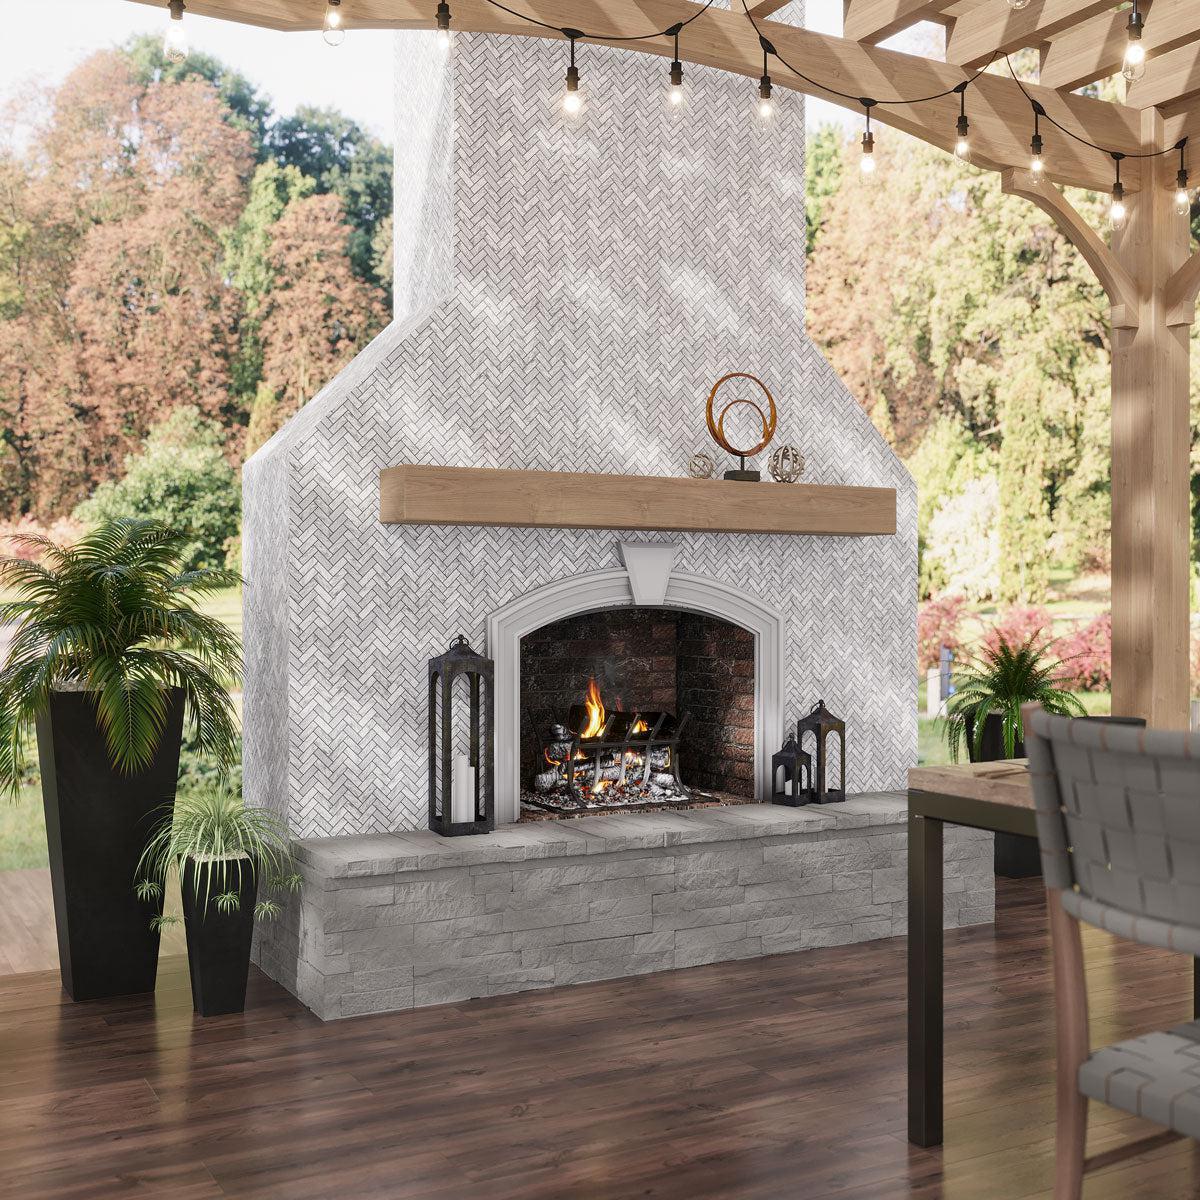 Outdoor patio with marble herringbone tiled fireplace